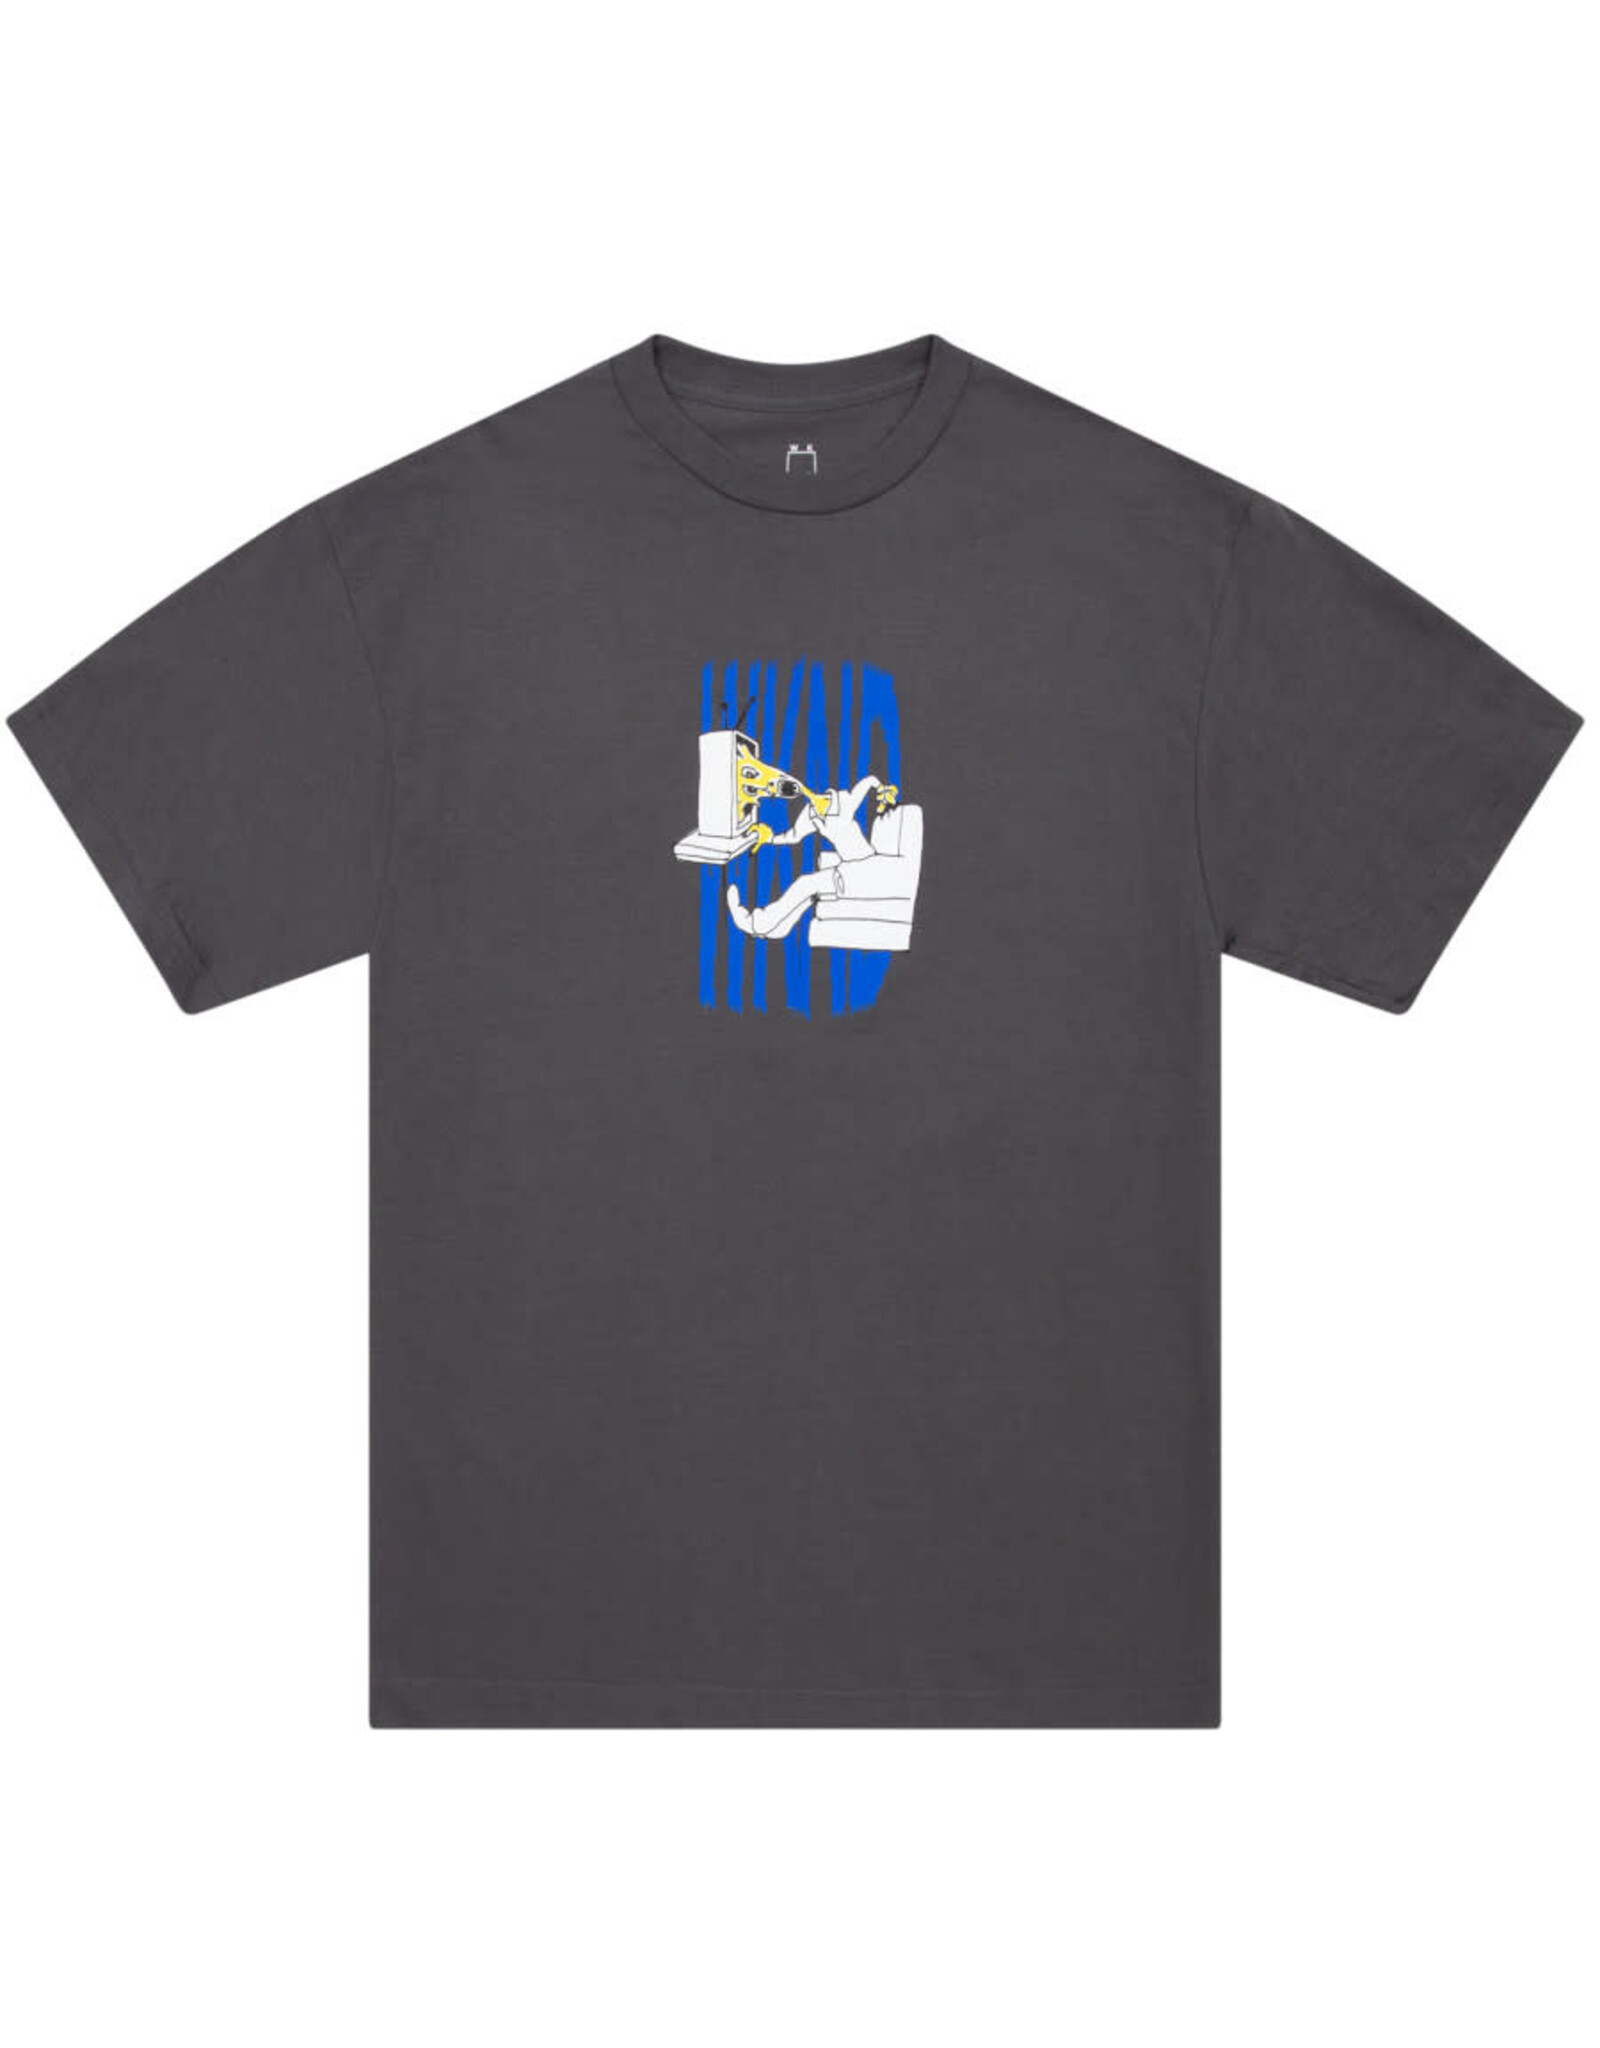 Wknd Skateboards Wknd Tee Channel 3 S/S (Charcoal)